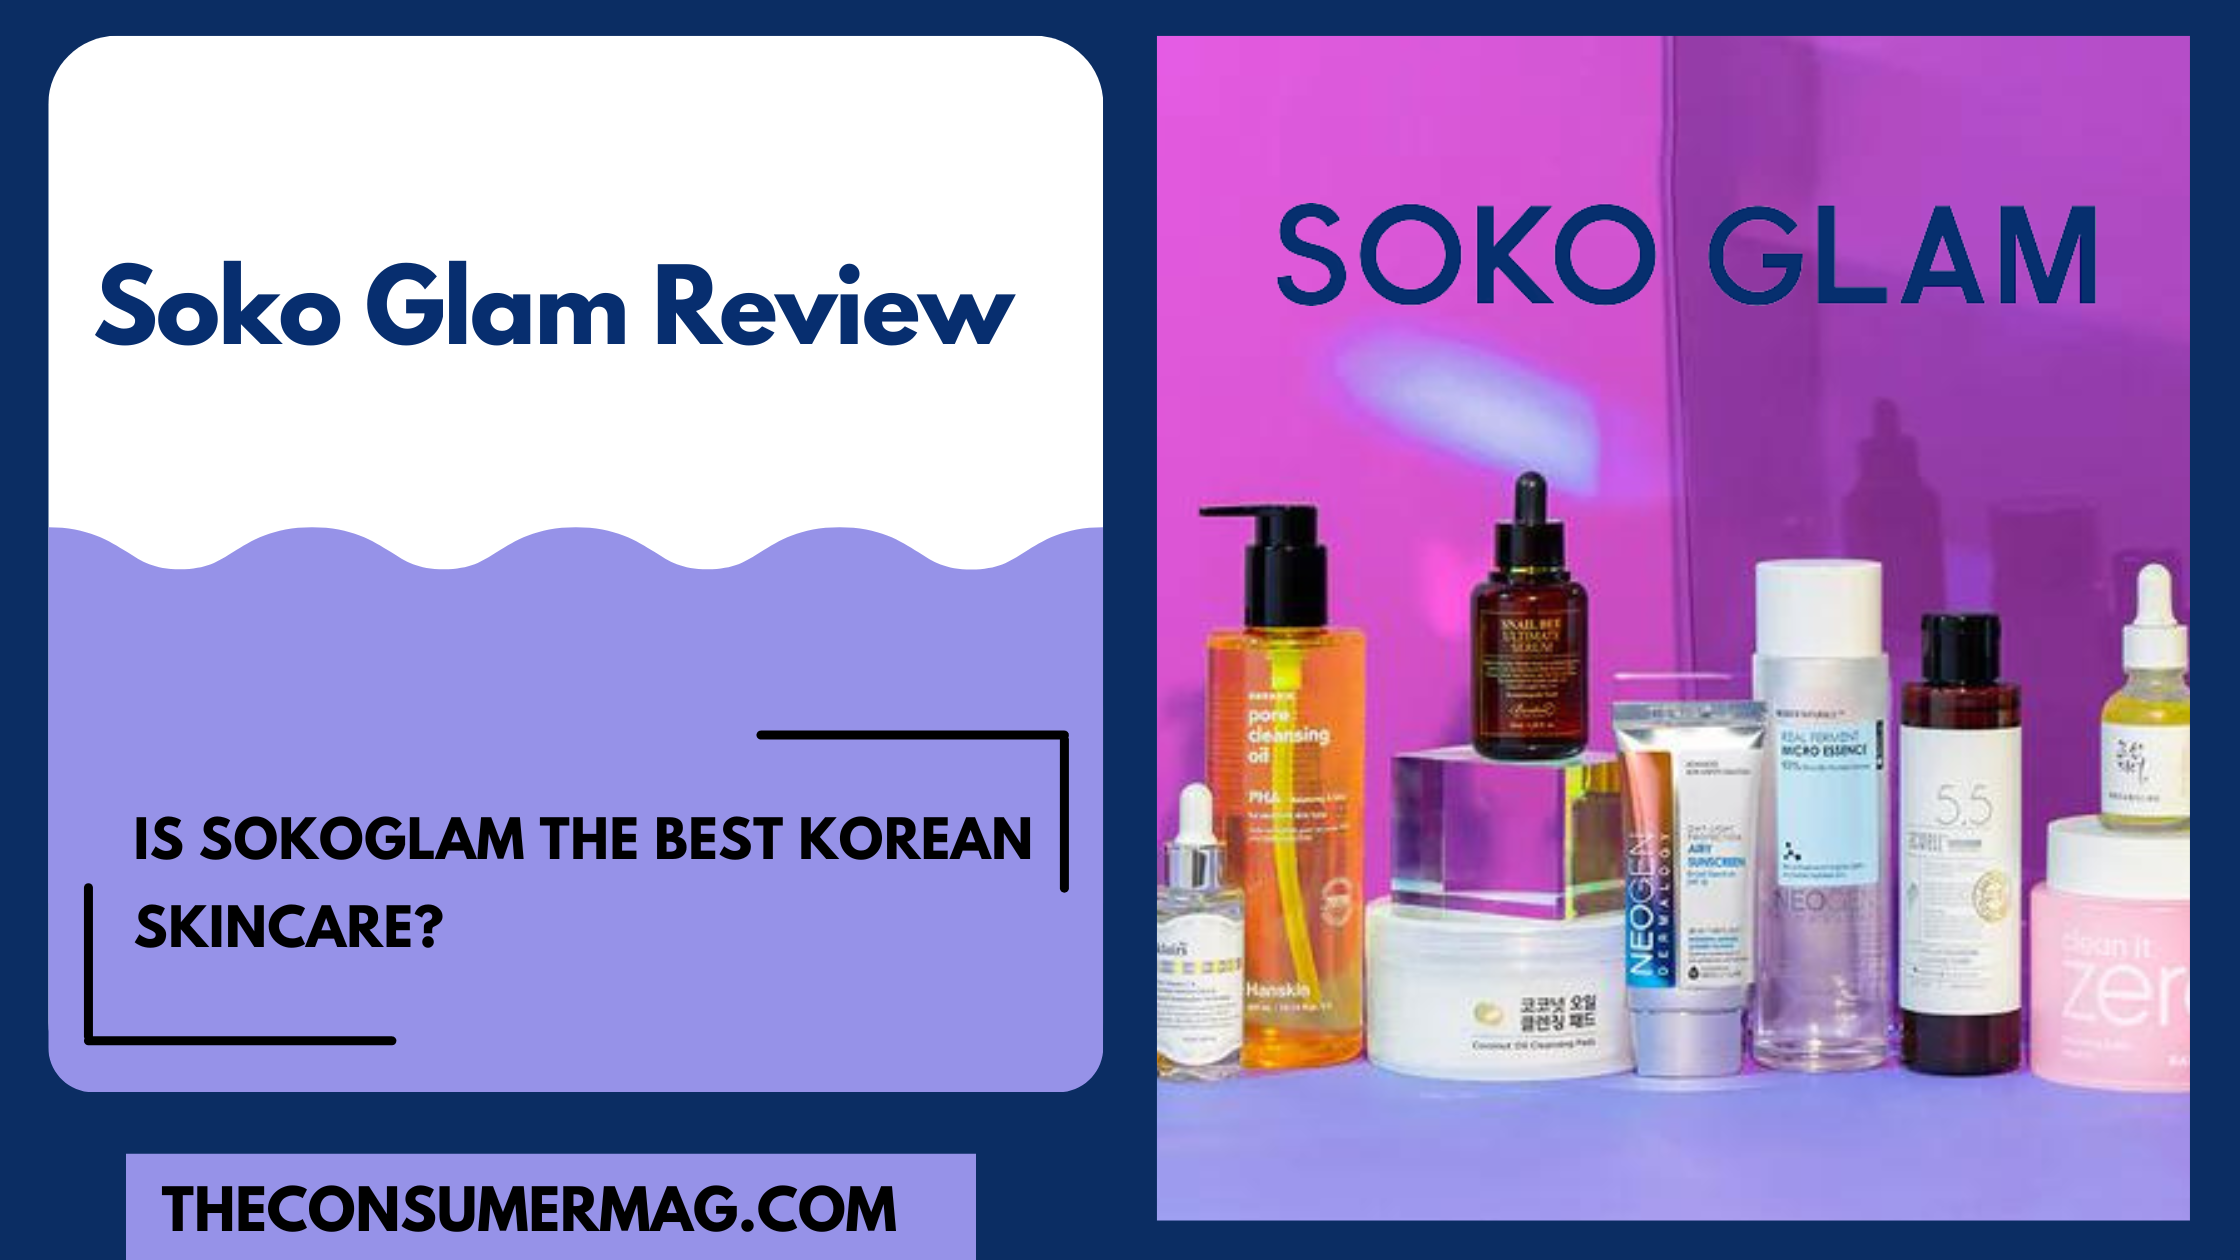 Soko Glam featured image